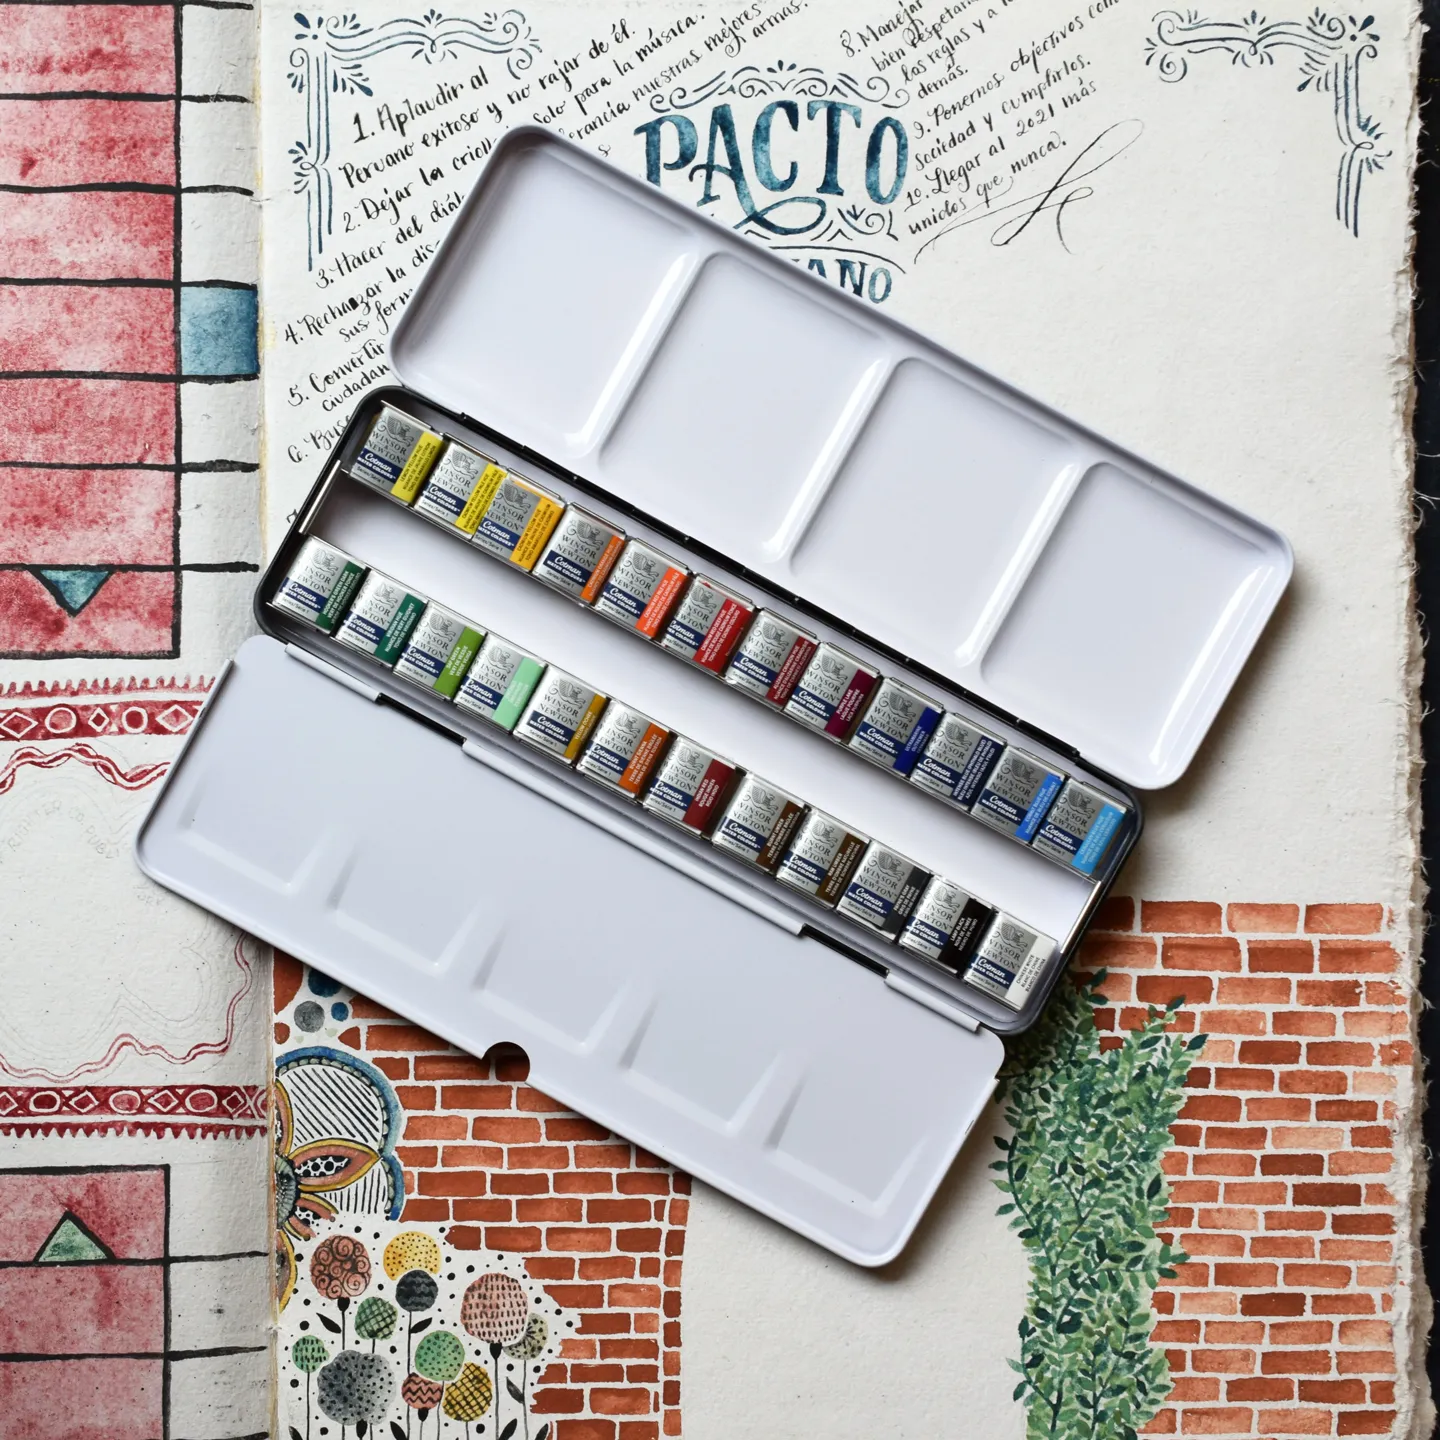 Winsor and Newton Watercolors: Which One Should You Buy?